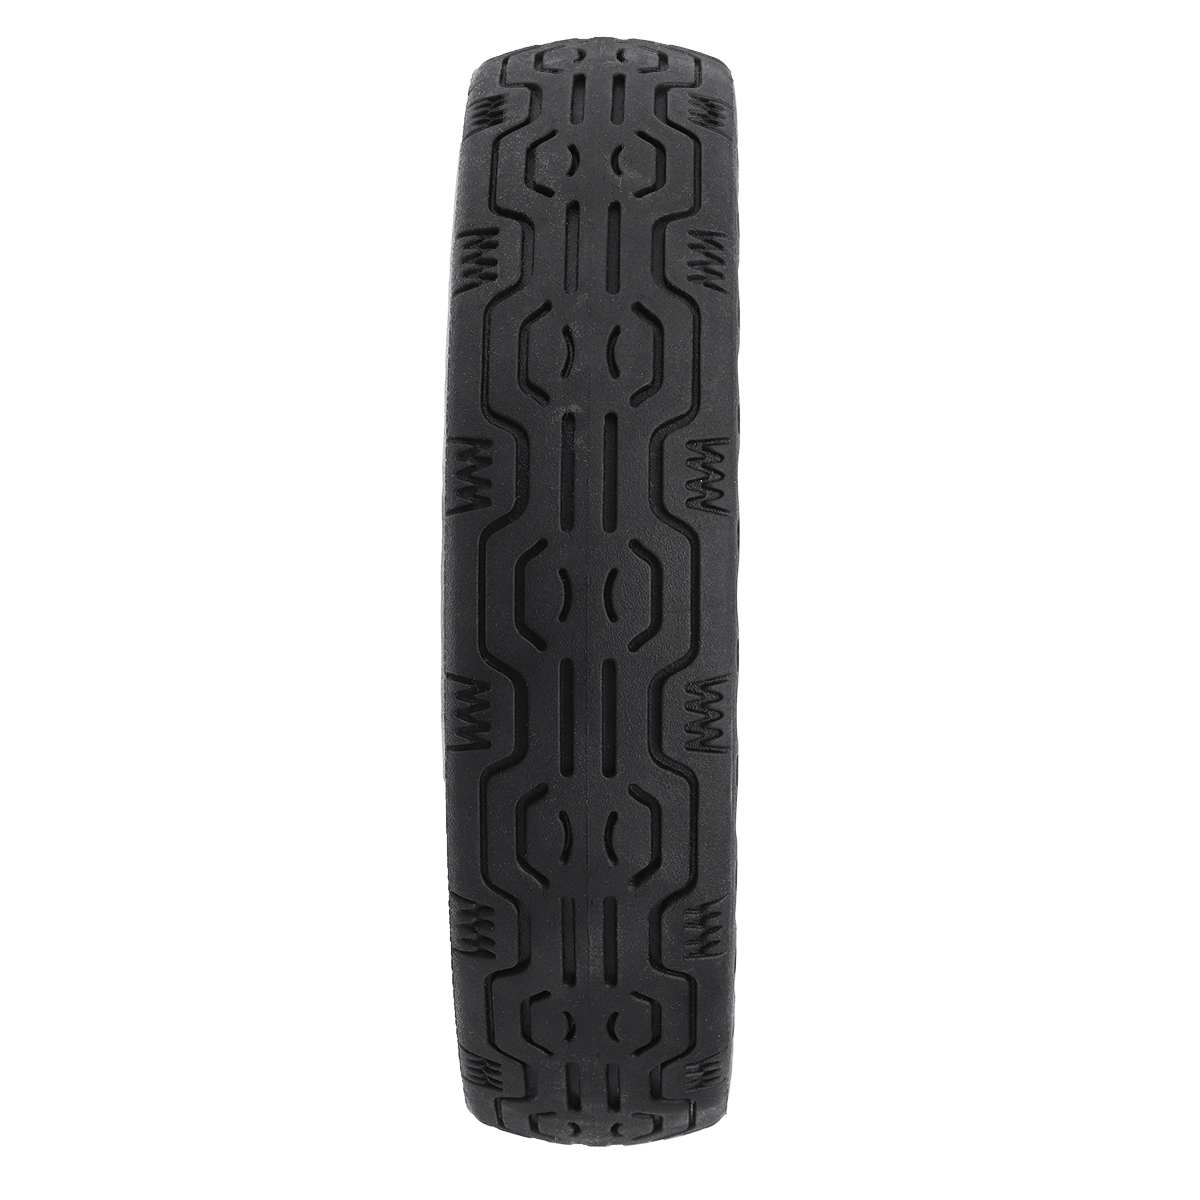 Solid Tire Honeycomb Anti-Explosion for Ninebot Es1/2/3/4 Electric Scooter - Auto GoShop